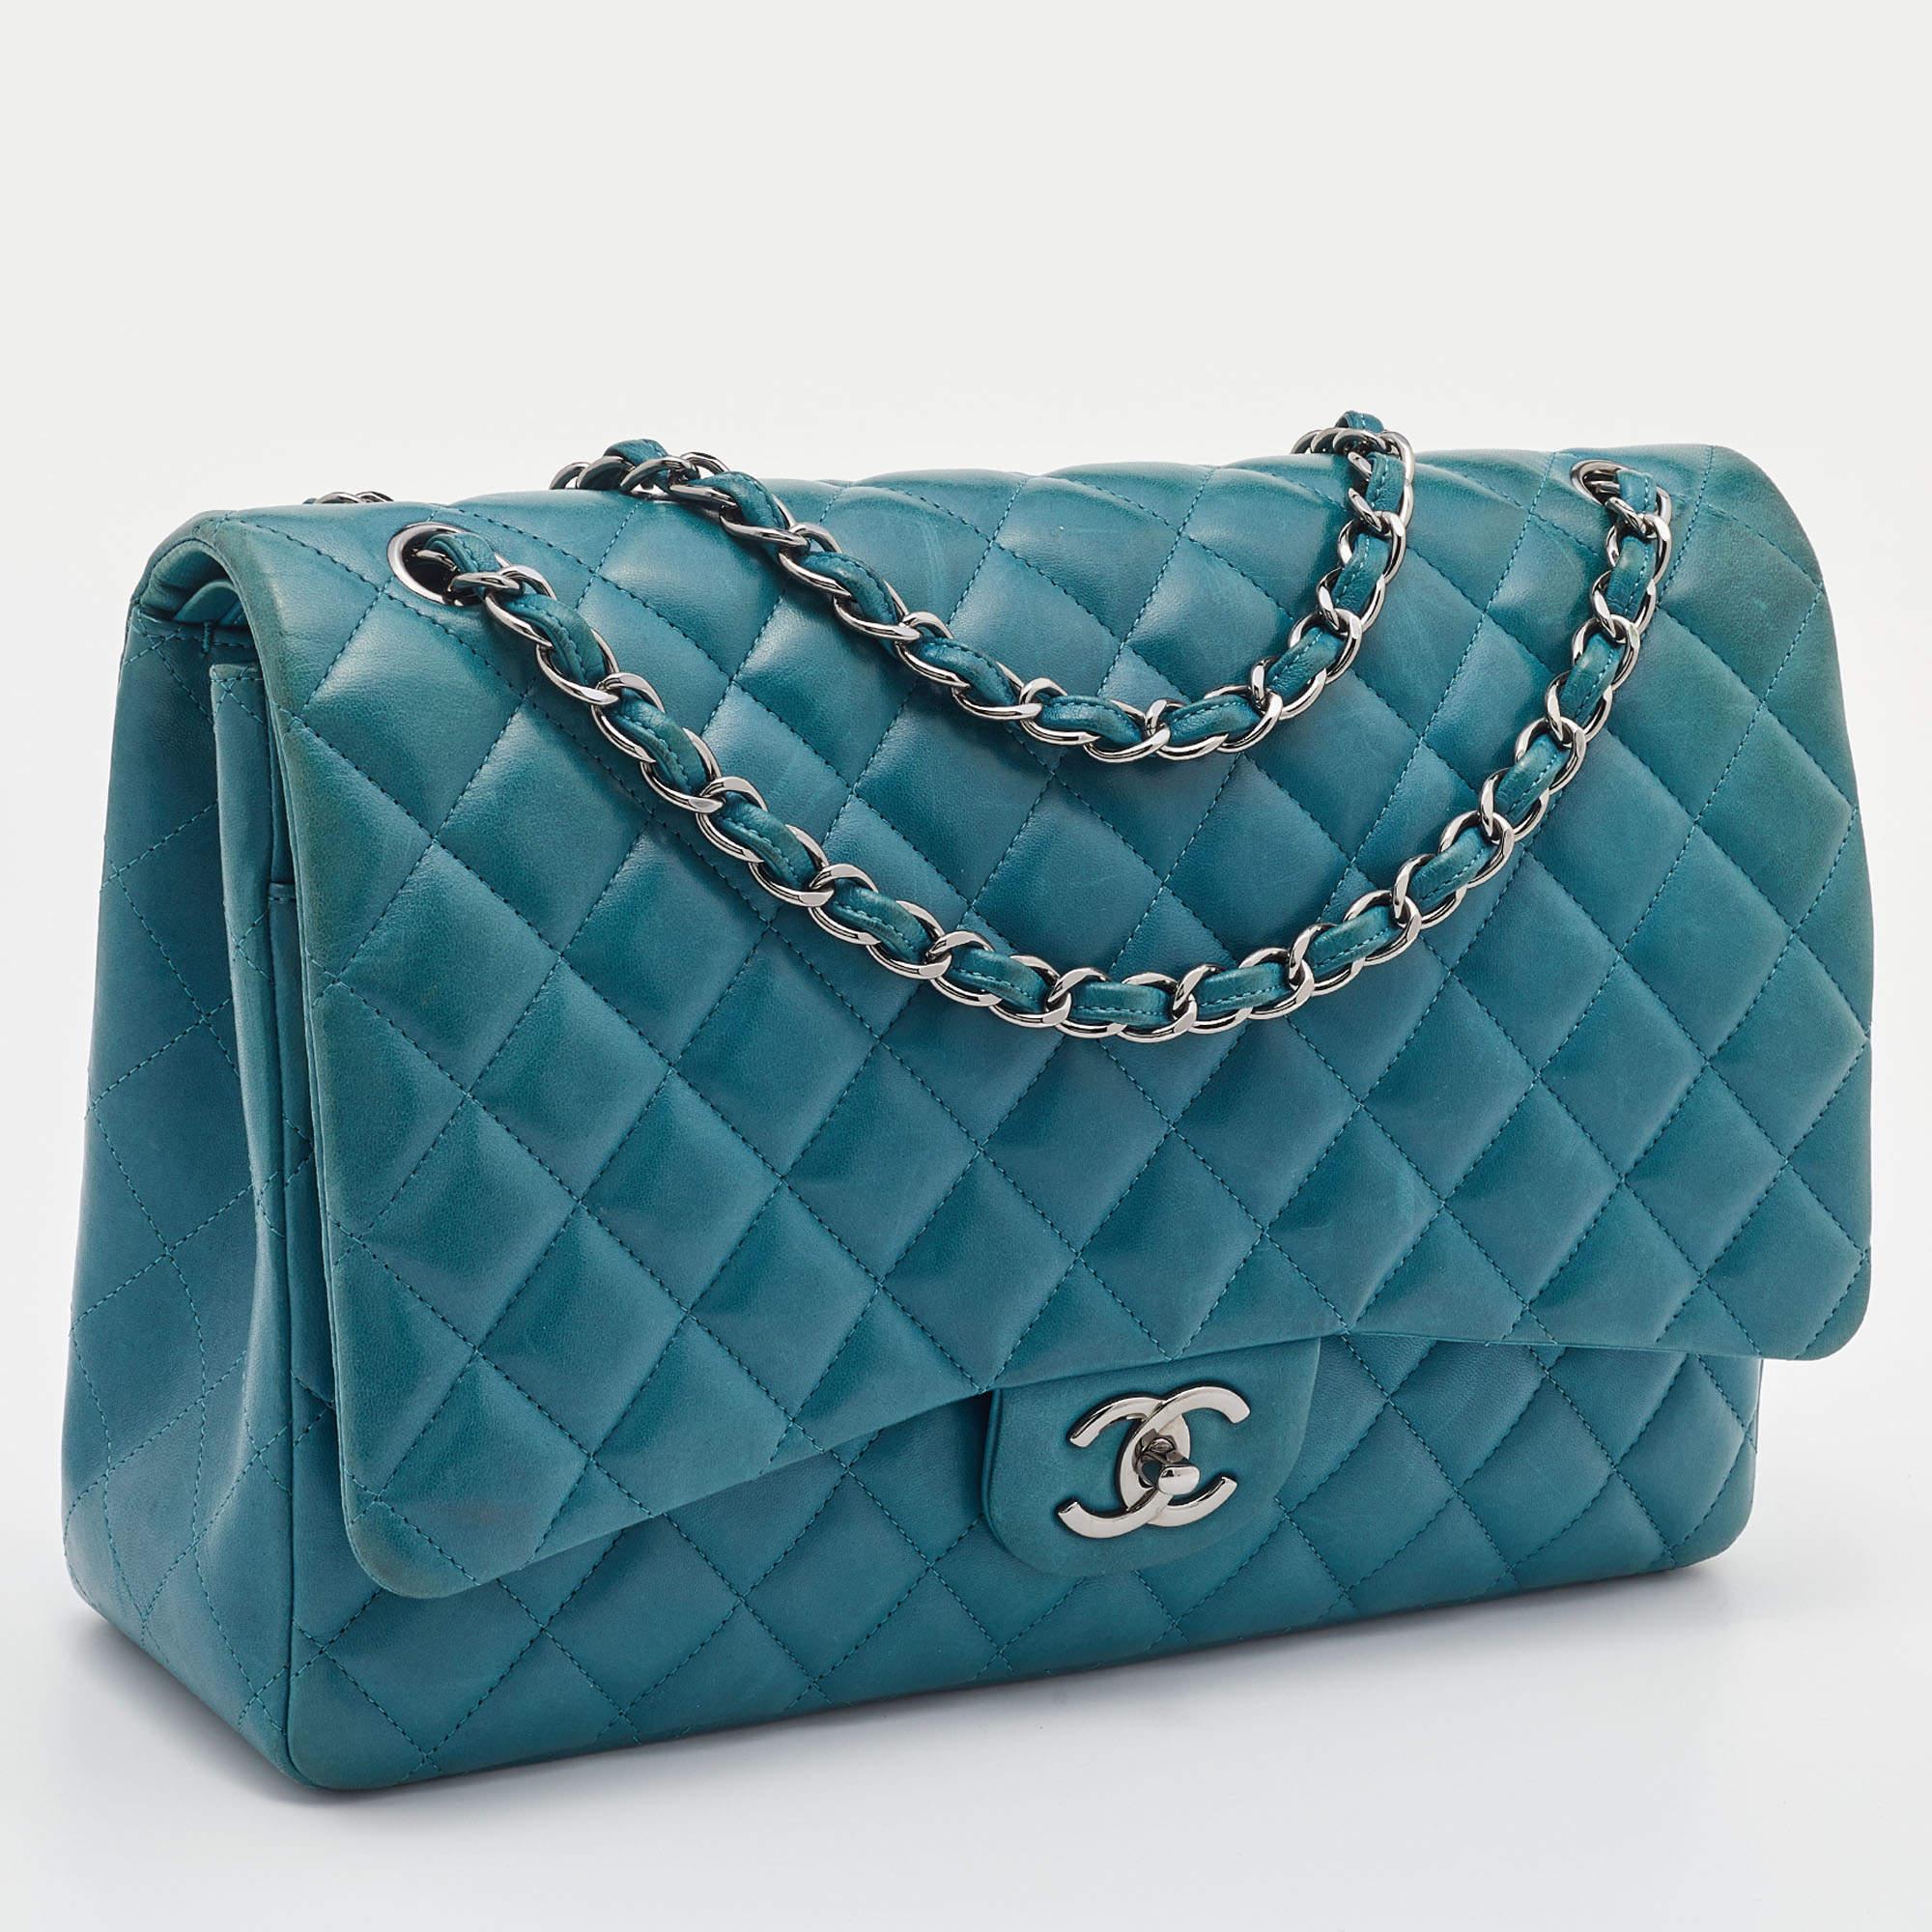 Women's Chanel Green Quilted Leather Maxi Classic Double Flap Bag